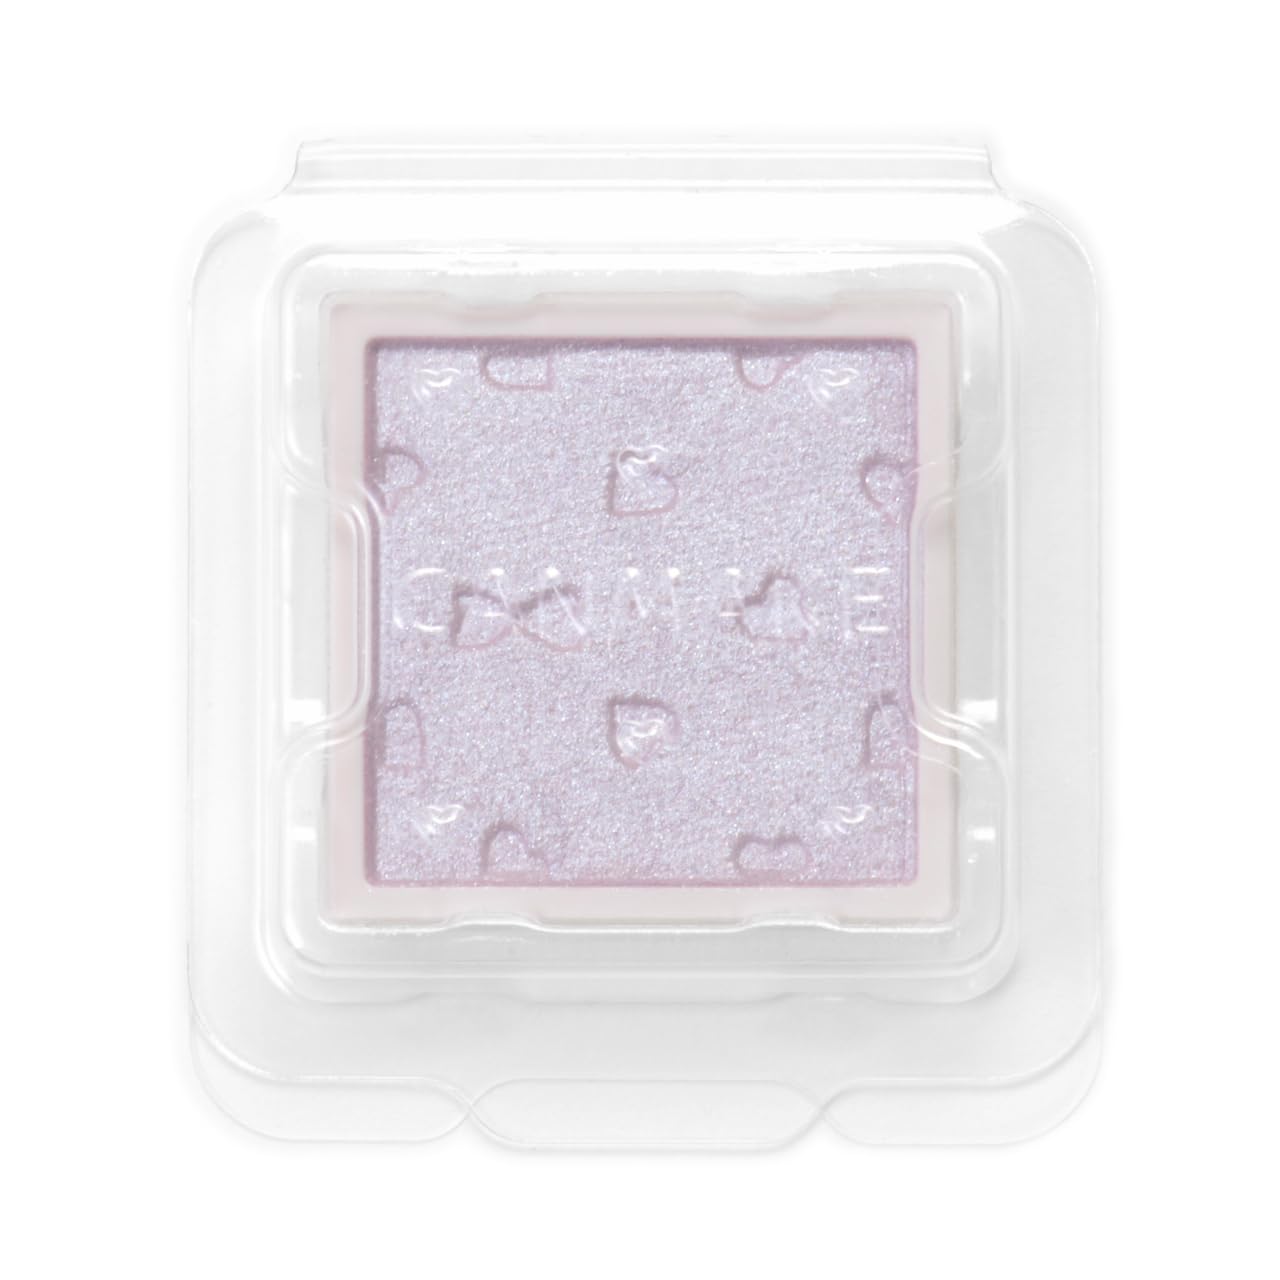 Canmake My Tone Couture Face Color Glossy Pearl Purple - Icy Lilac 1.4g